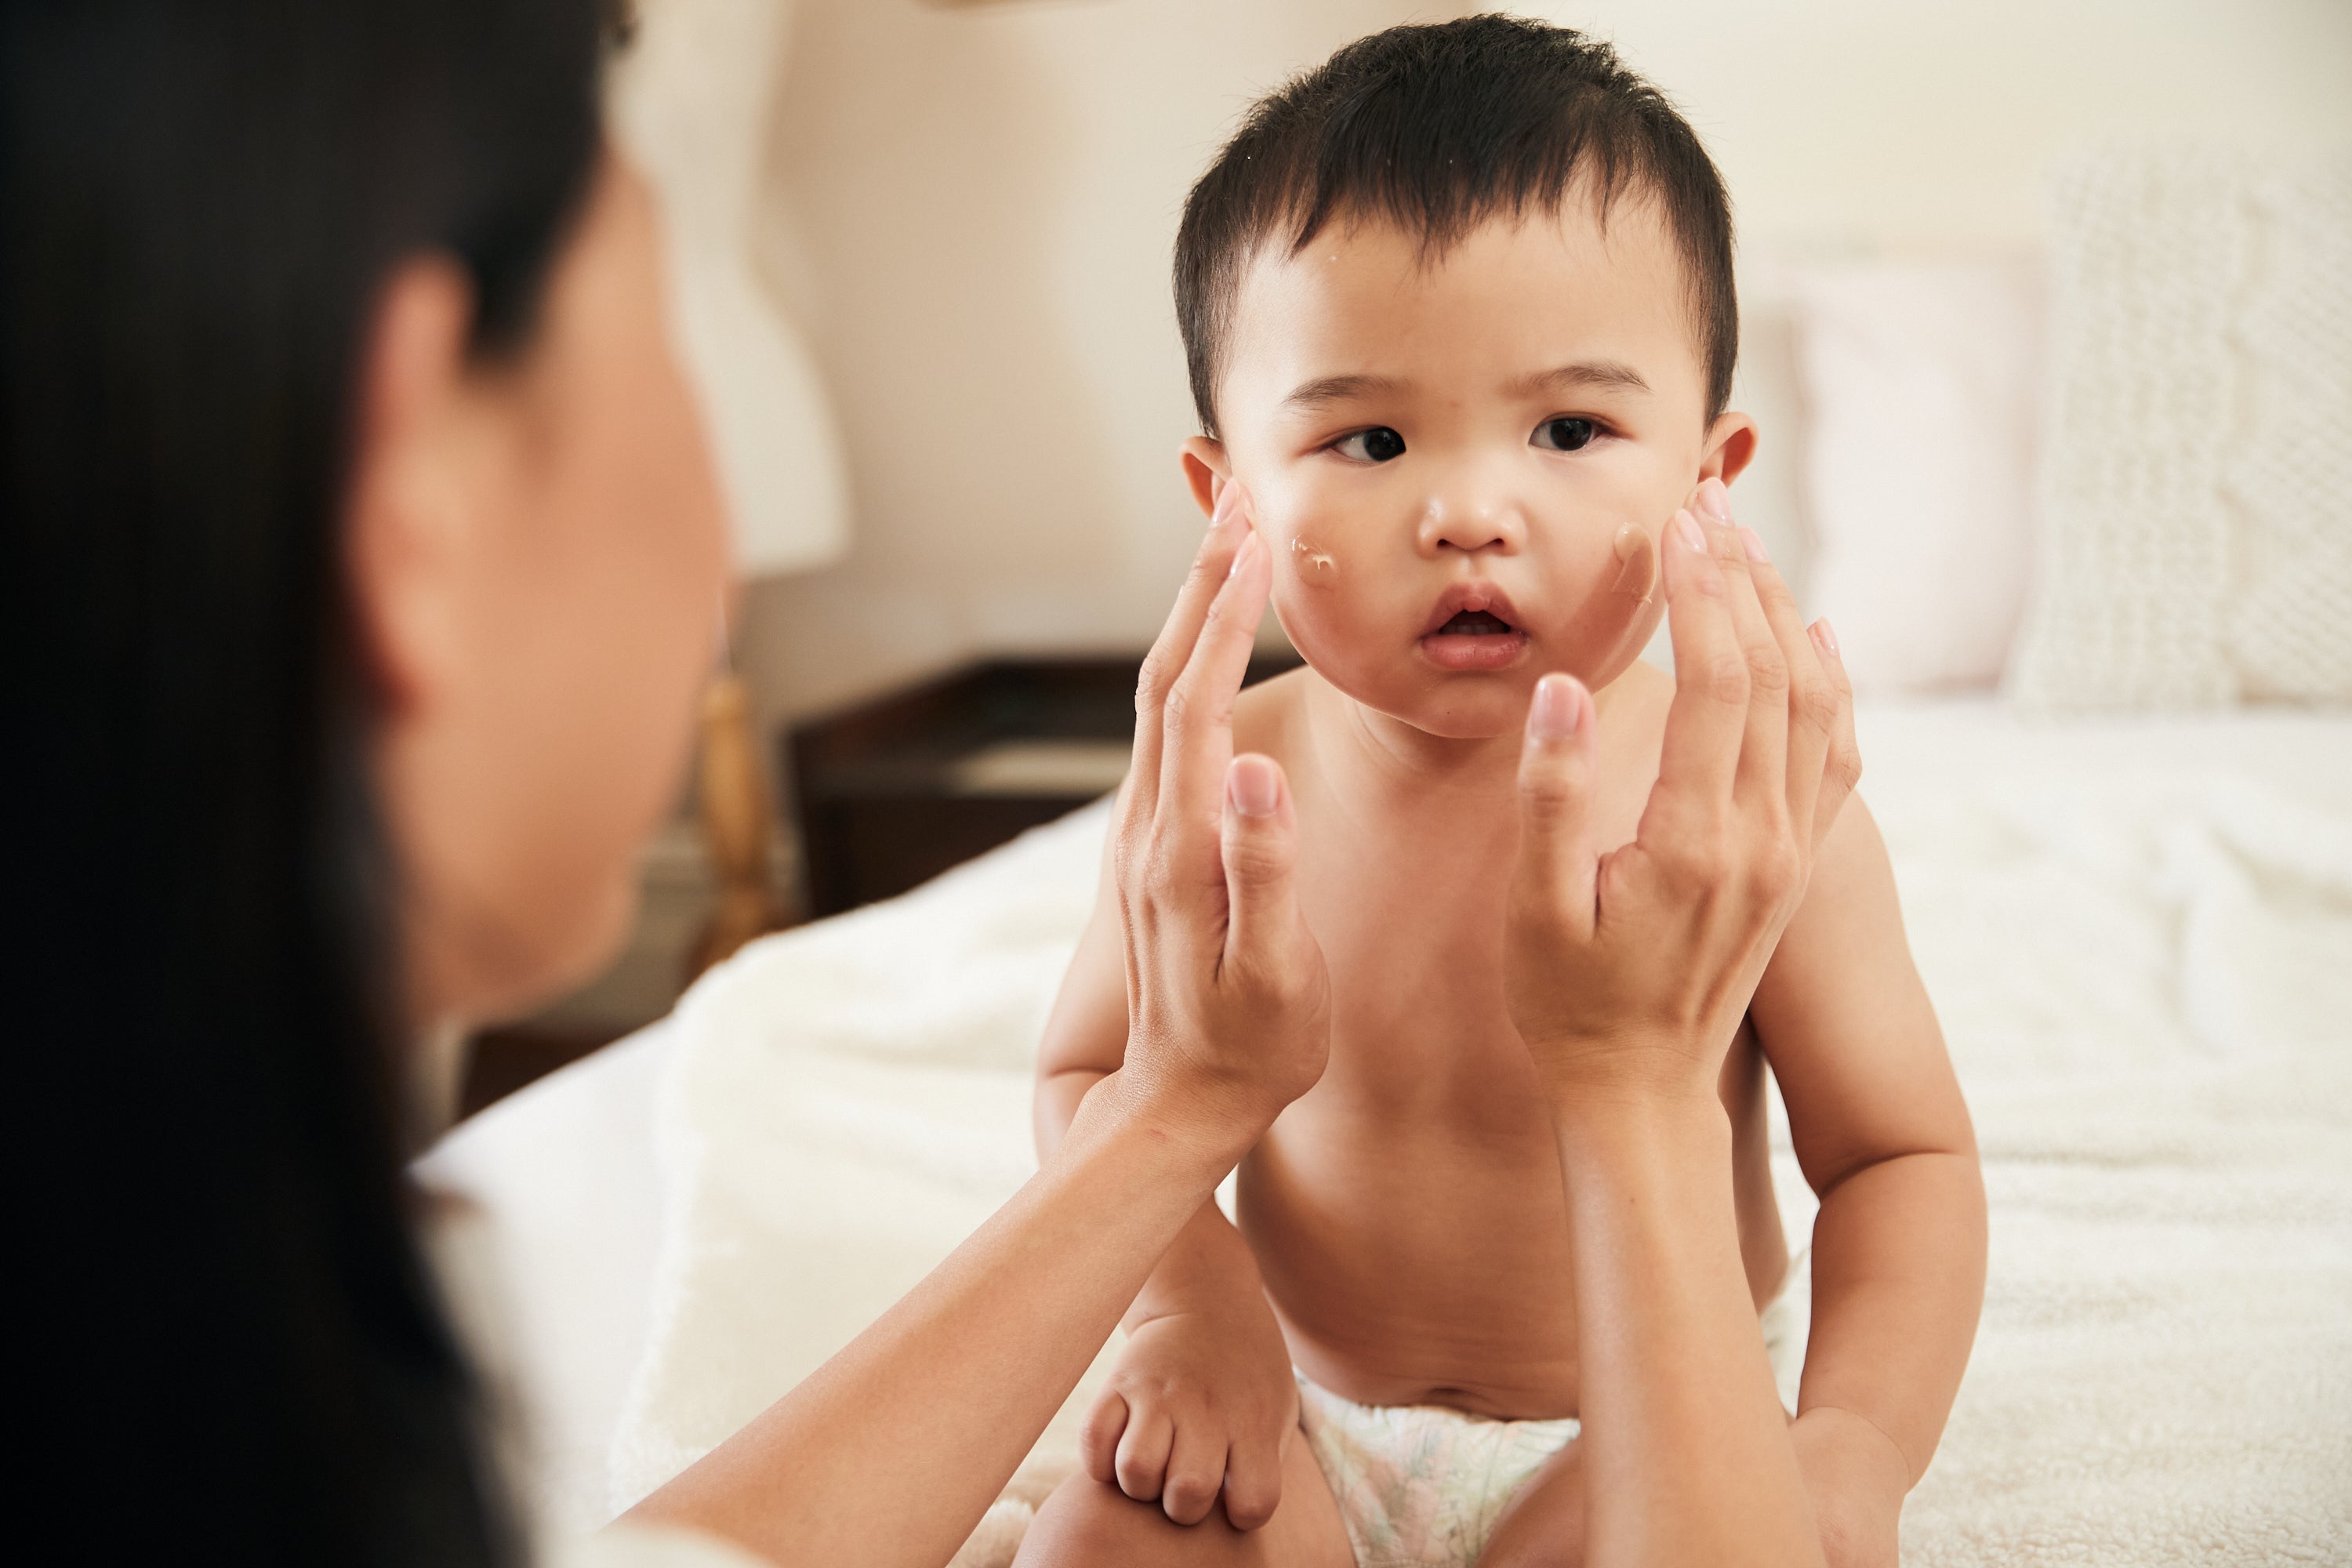 Daily eczema treatment for your child